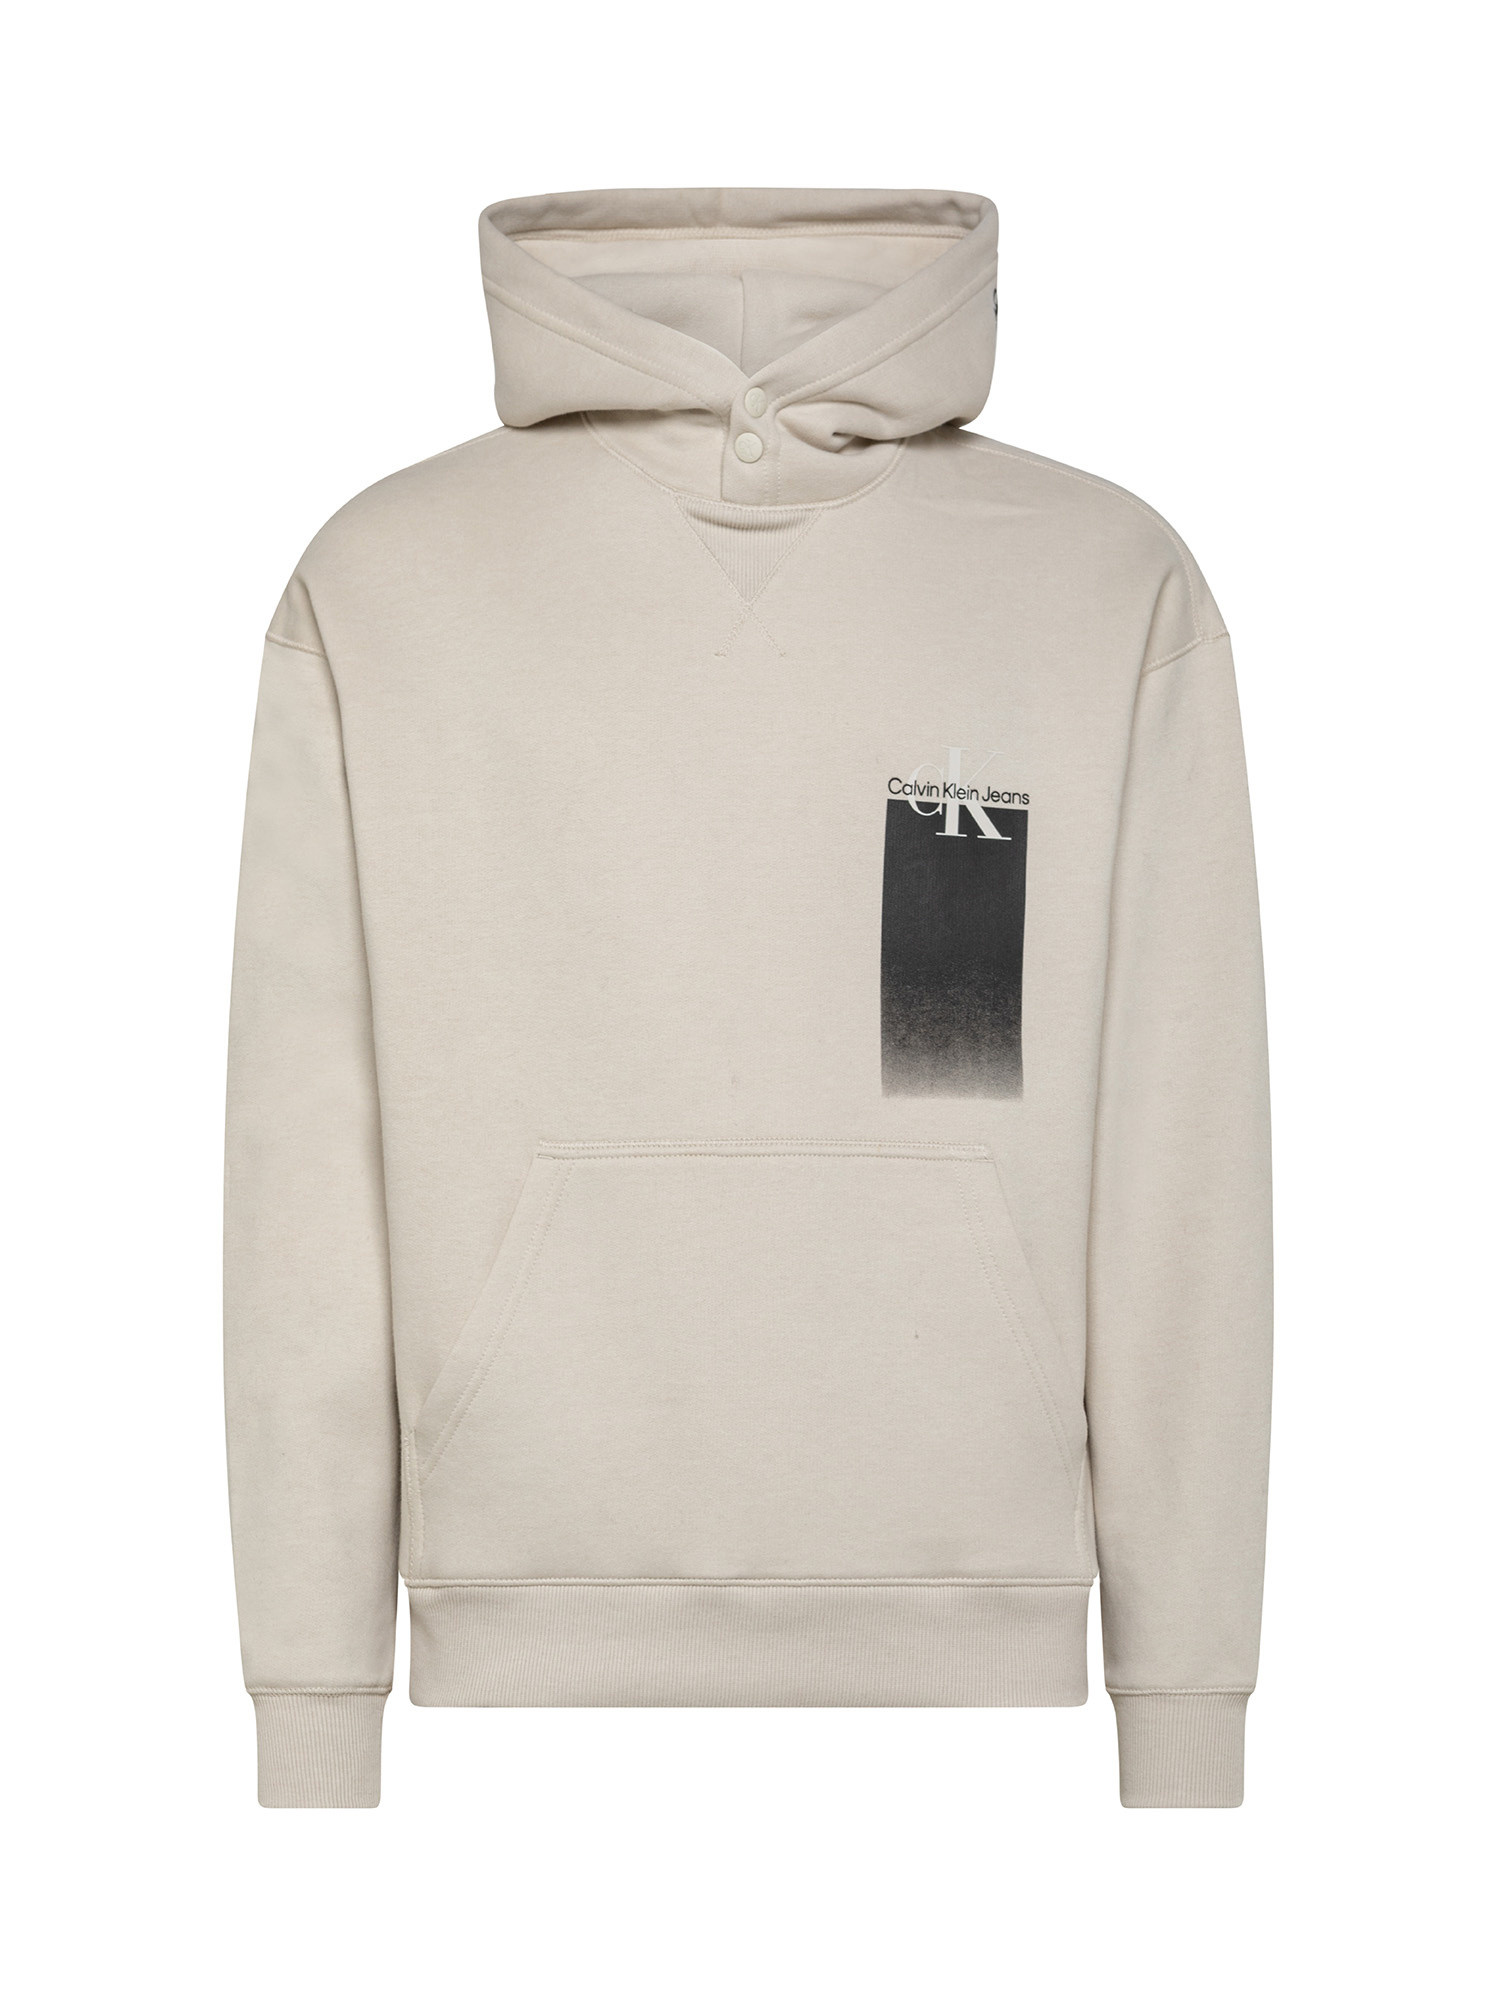 Hooded sweatshirt with graphic print, Beige, large image number 0